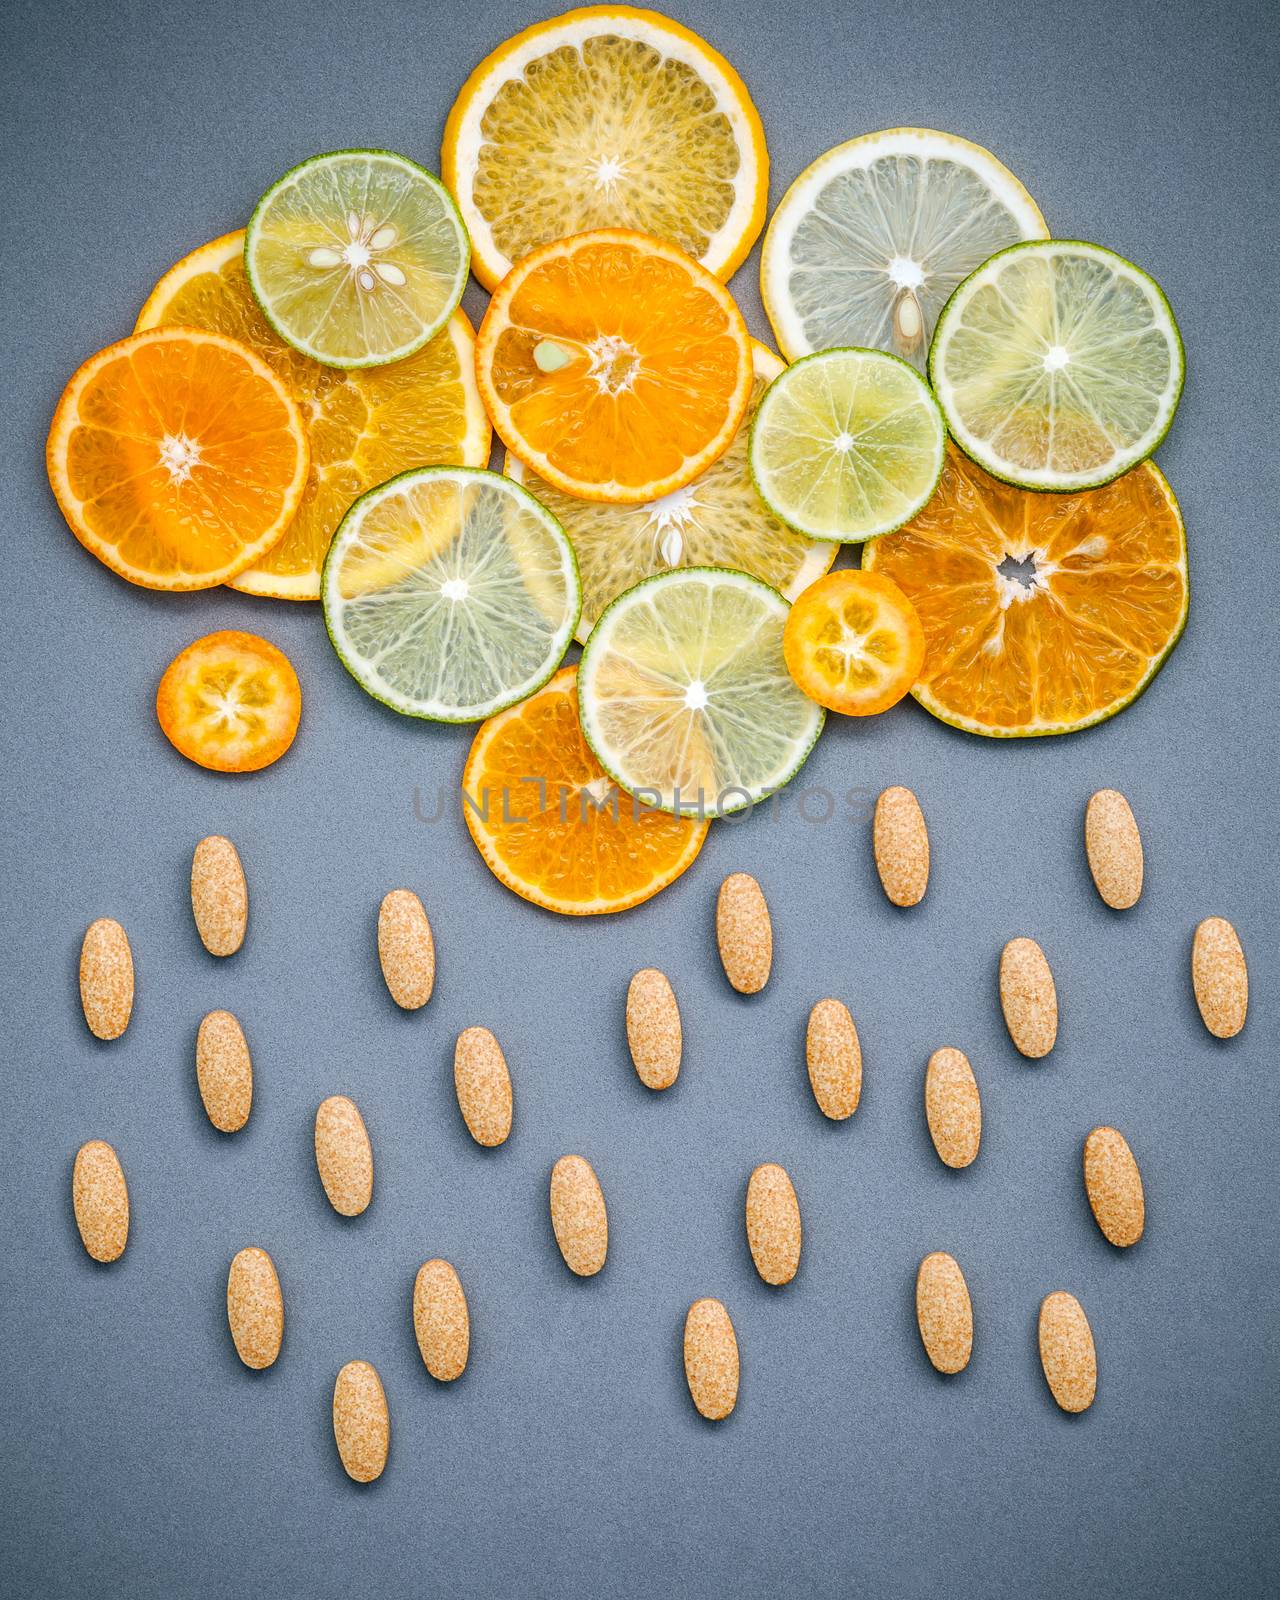 Healthy foods and medicine concept. Pills of vitamin C and various citrus fruits sliced in the shape of cloud and raining. Mixed citrus fruits sliced lime,orange ,kumquat and lemon on gray background.